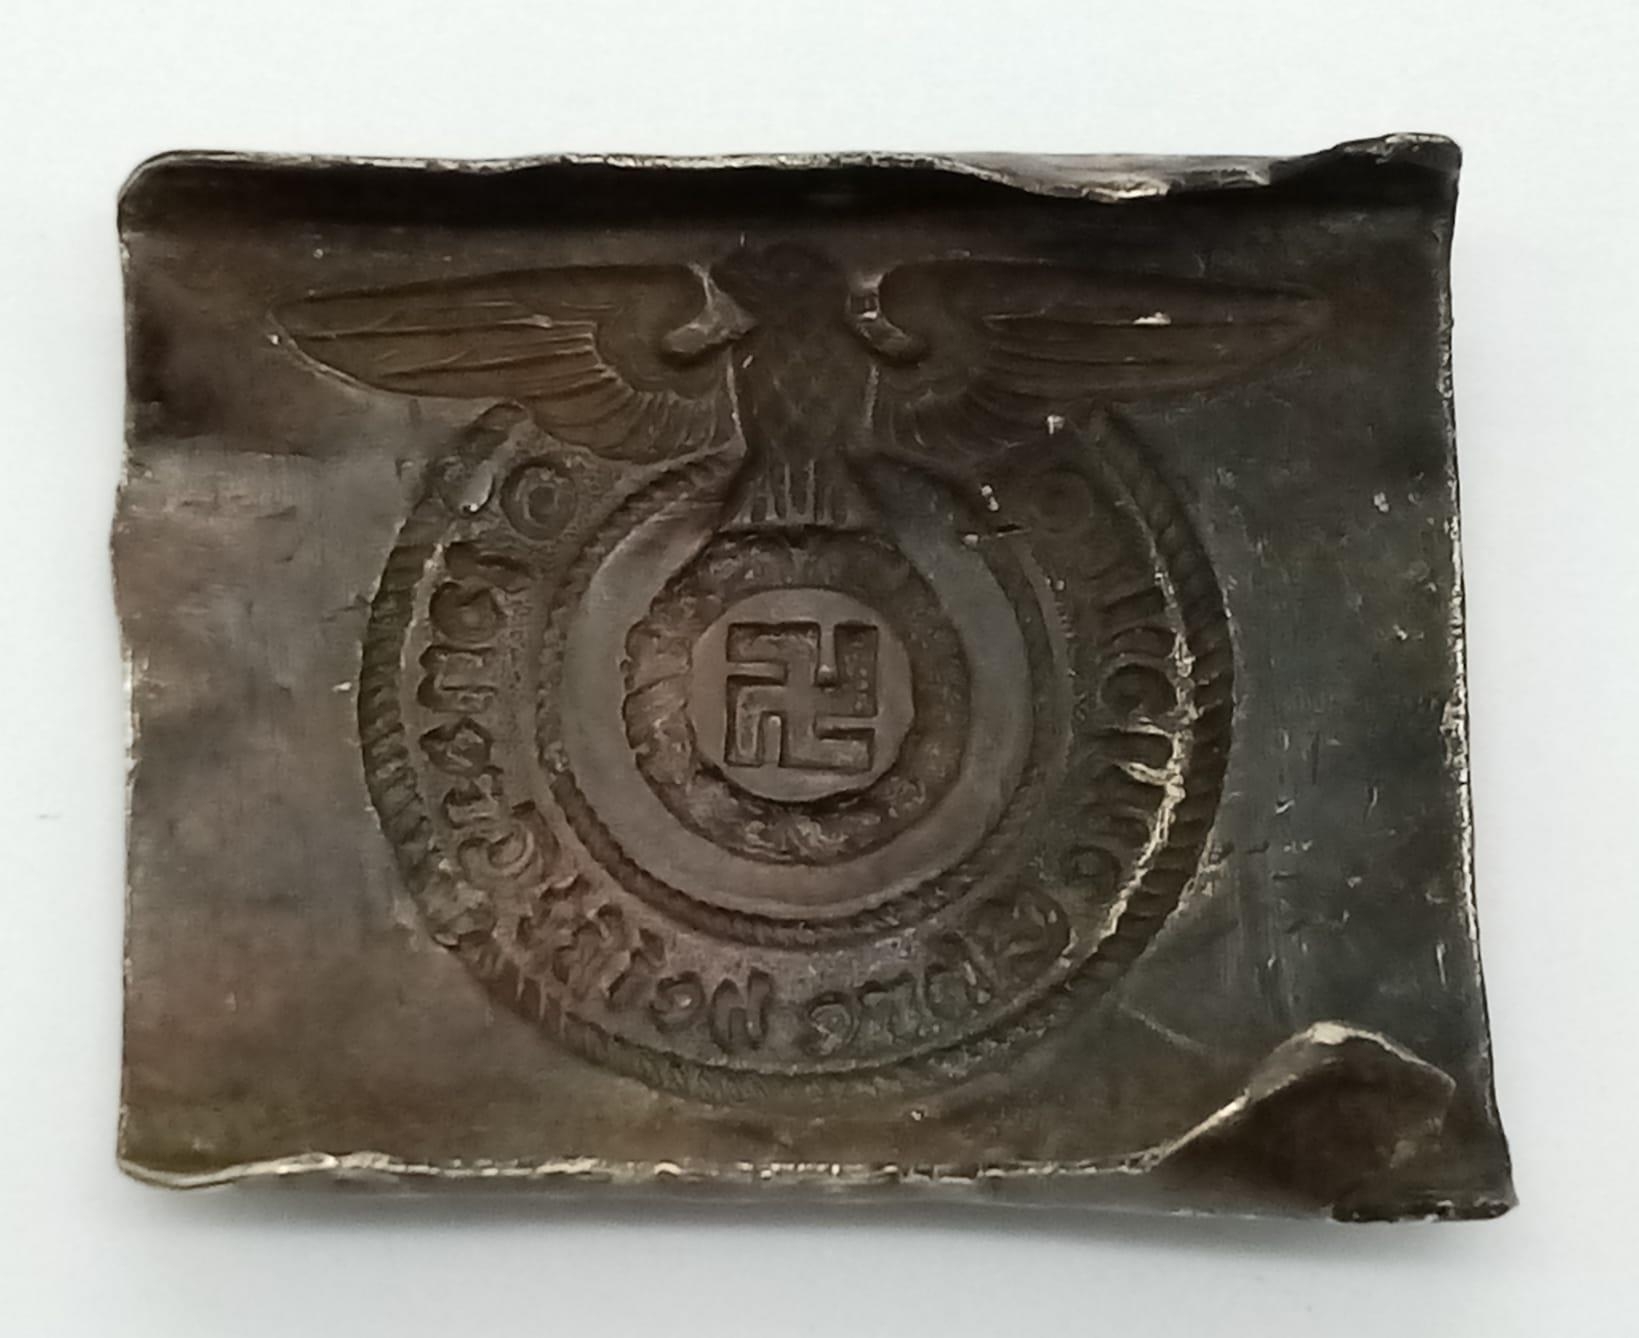 WW2 German Waffen SS 15th Grenadier Lett Land (Latvia) Division Buckle. The buckle was found in - Image 2 of 3